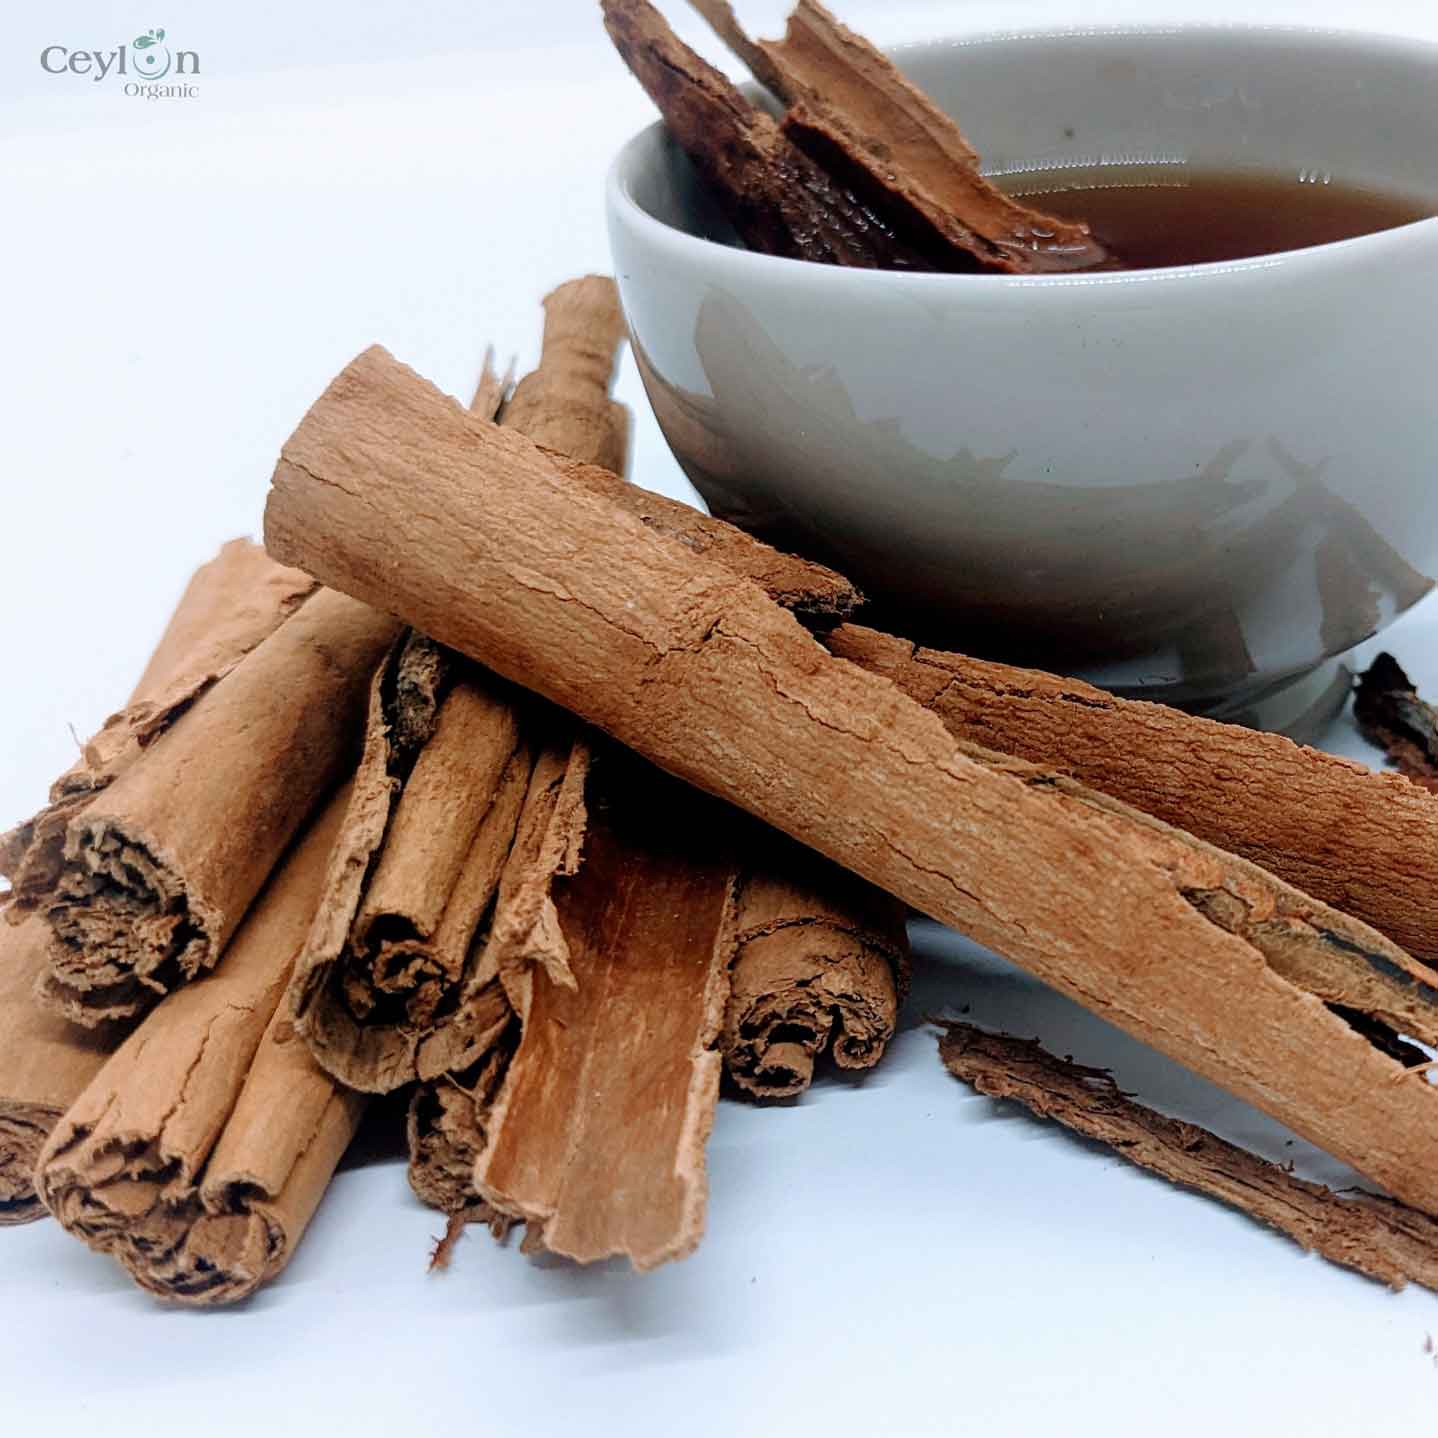 2kg+ Cinnamon Sticks - The Perfect Spice for Baking, Cooking, and Tea | Ceylon Organic-3